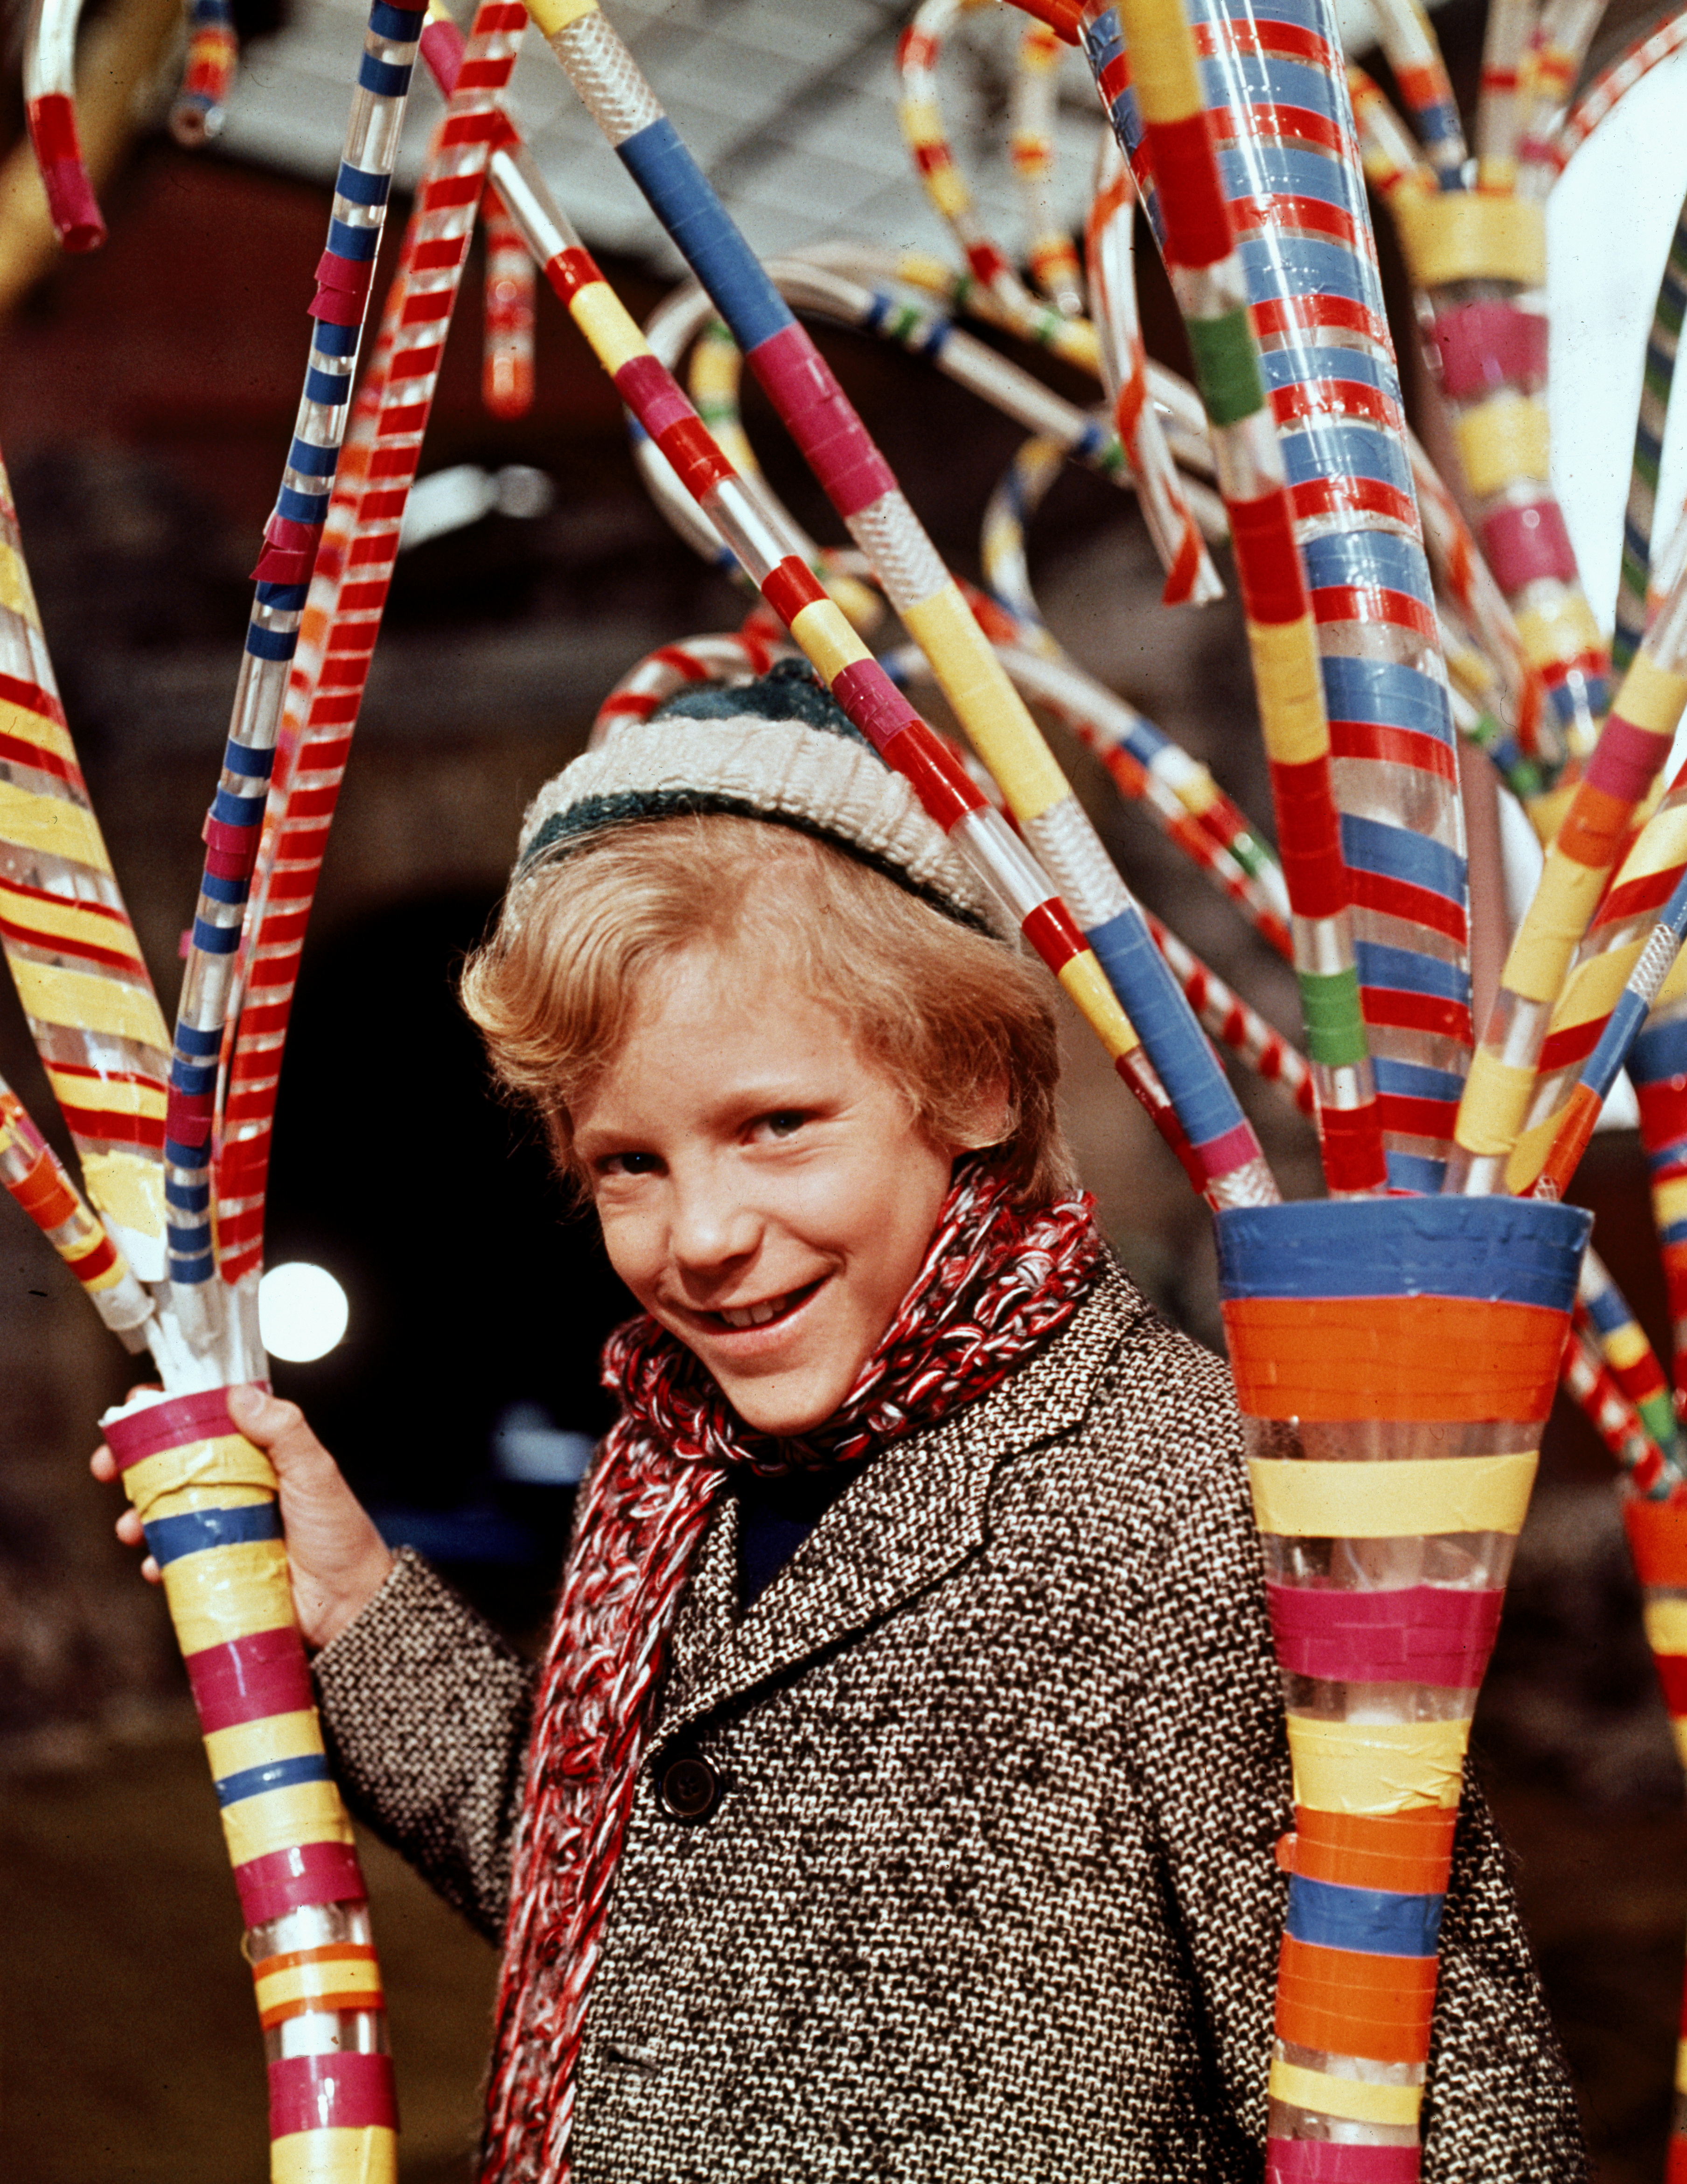 A handout image shows Peter Ostrum as Charlie Bucket in the 1971 film 'Willy Wonka & the Chocolate Factory.'